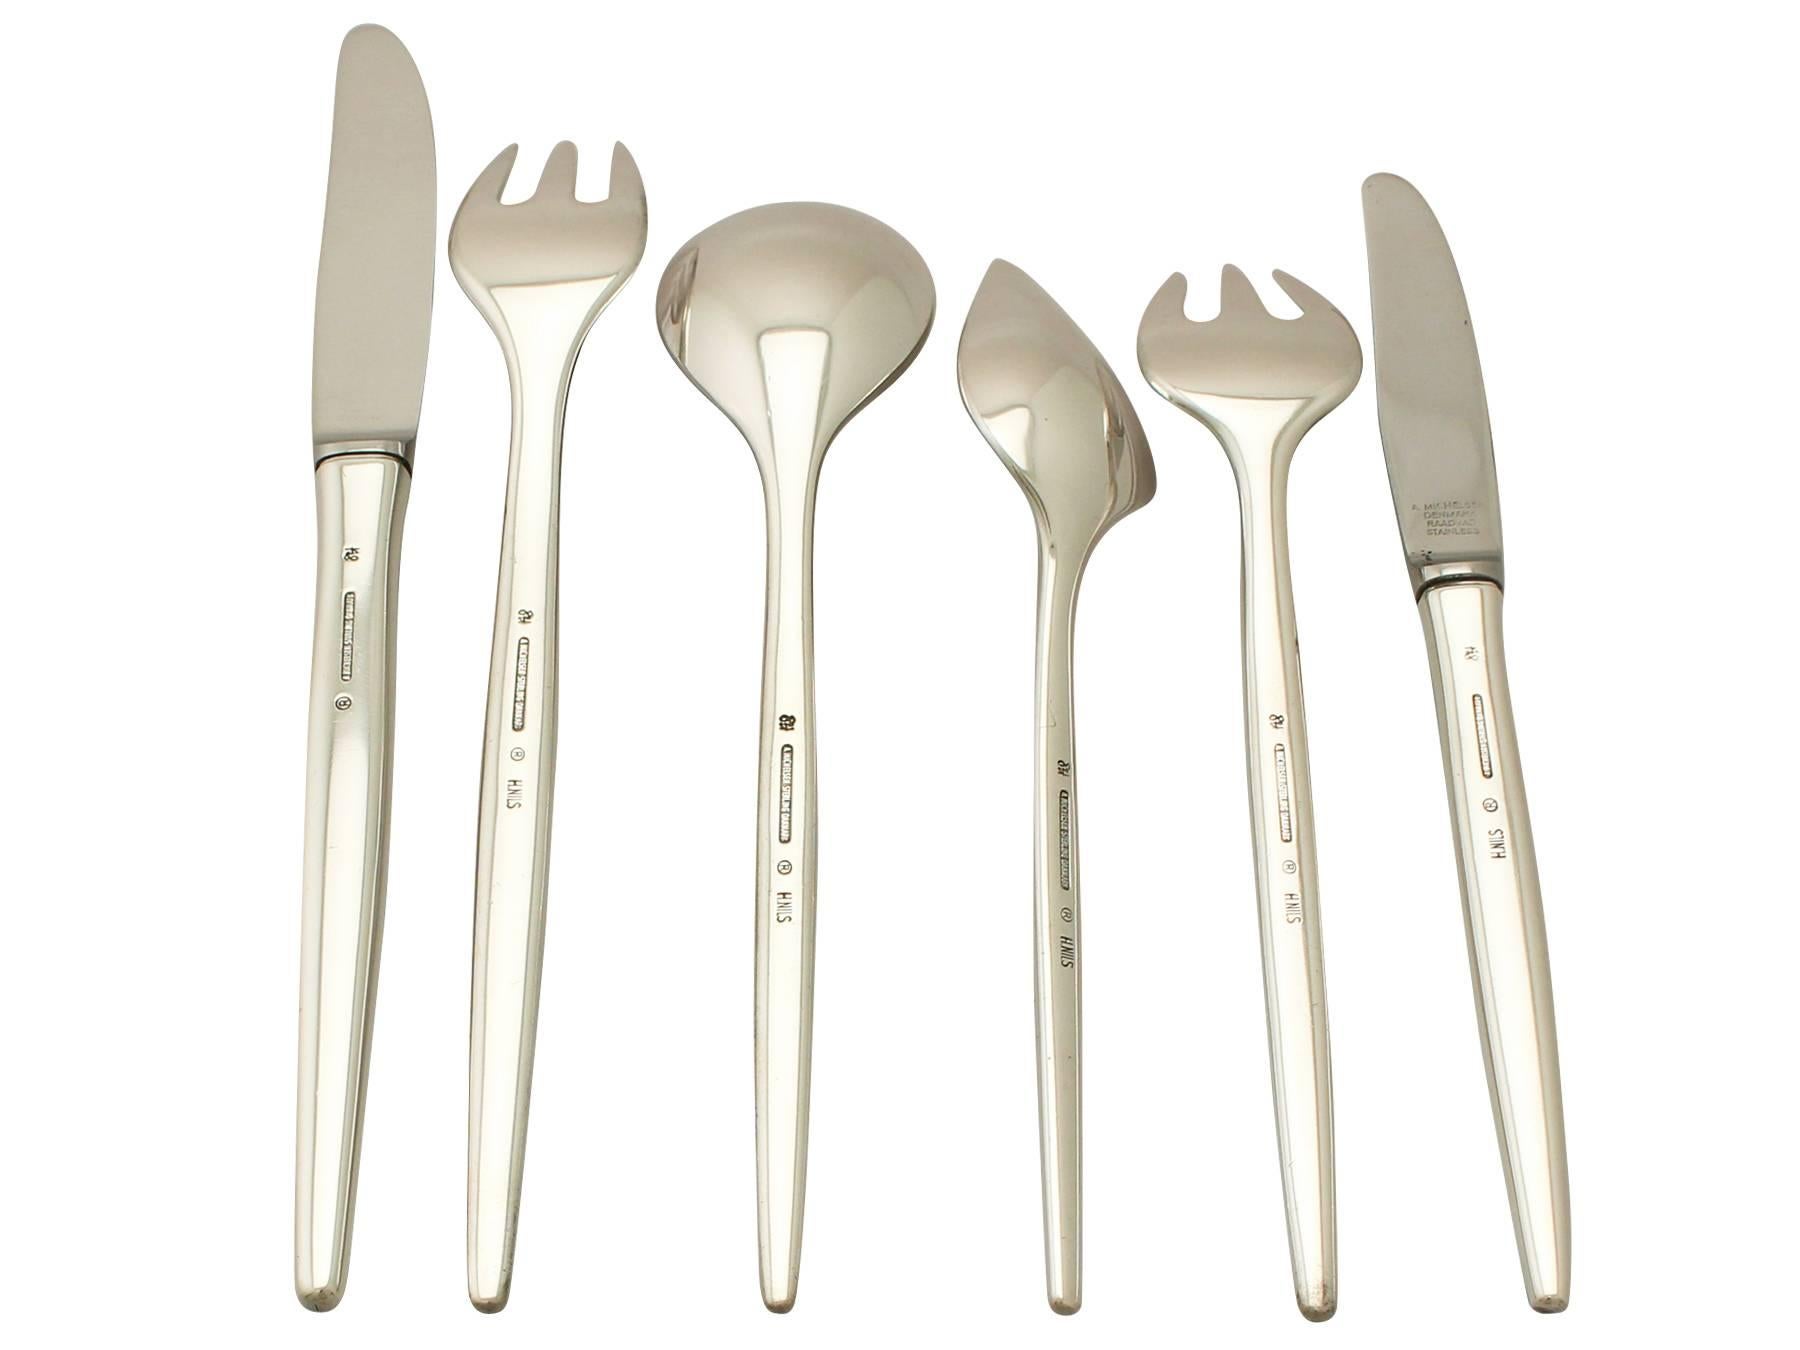 An exceptional, fine and impressive vintage Danish sterling silver straight flatware service for six persons, made in the Design style; an addition to our canteen of cutlery collection.

The pieces of this exceptional vintage sterling silver